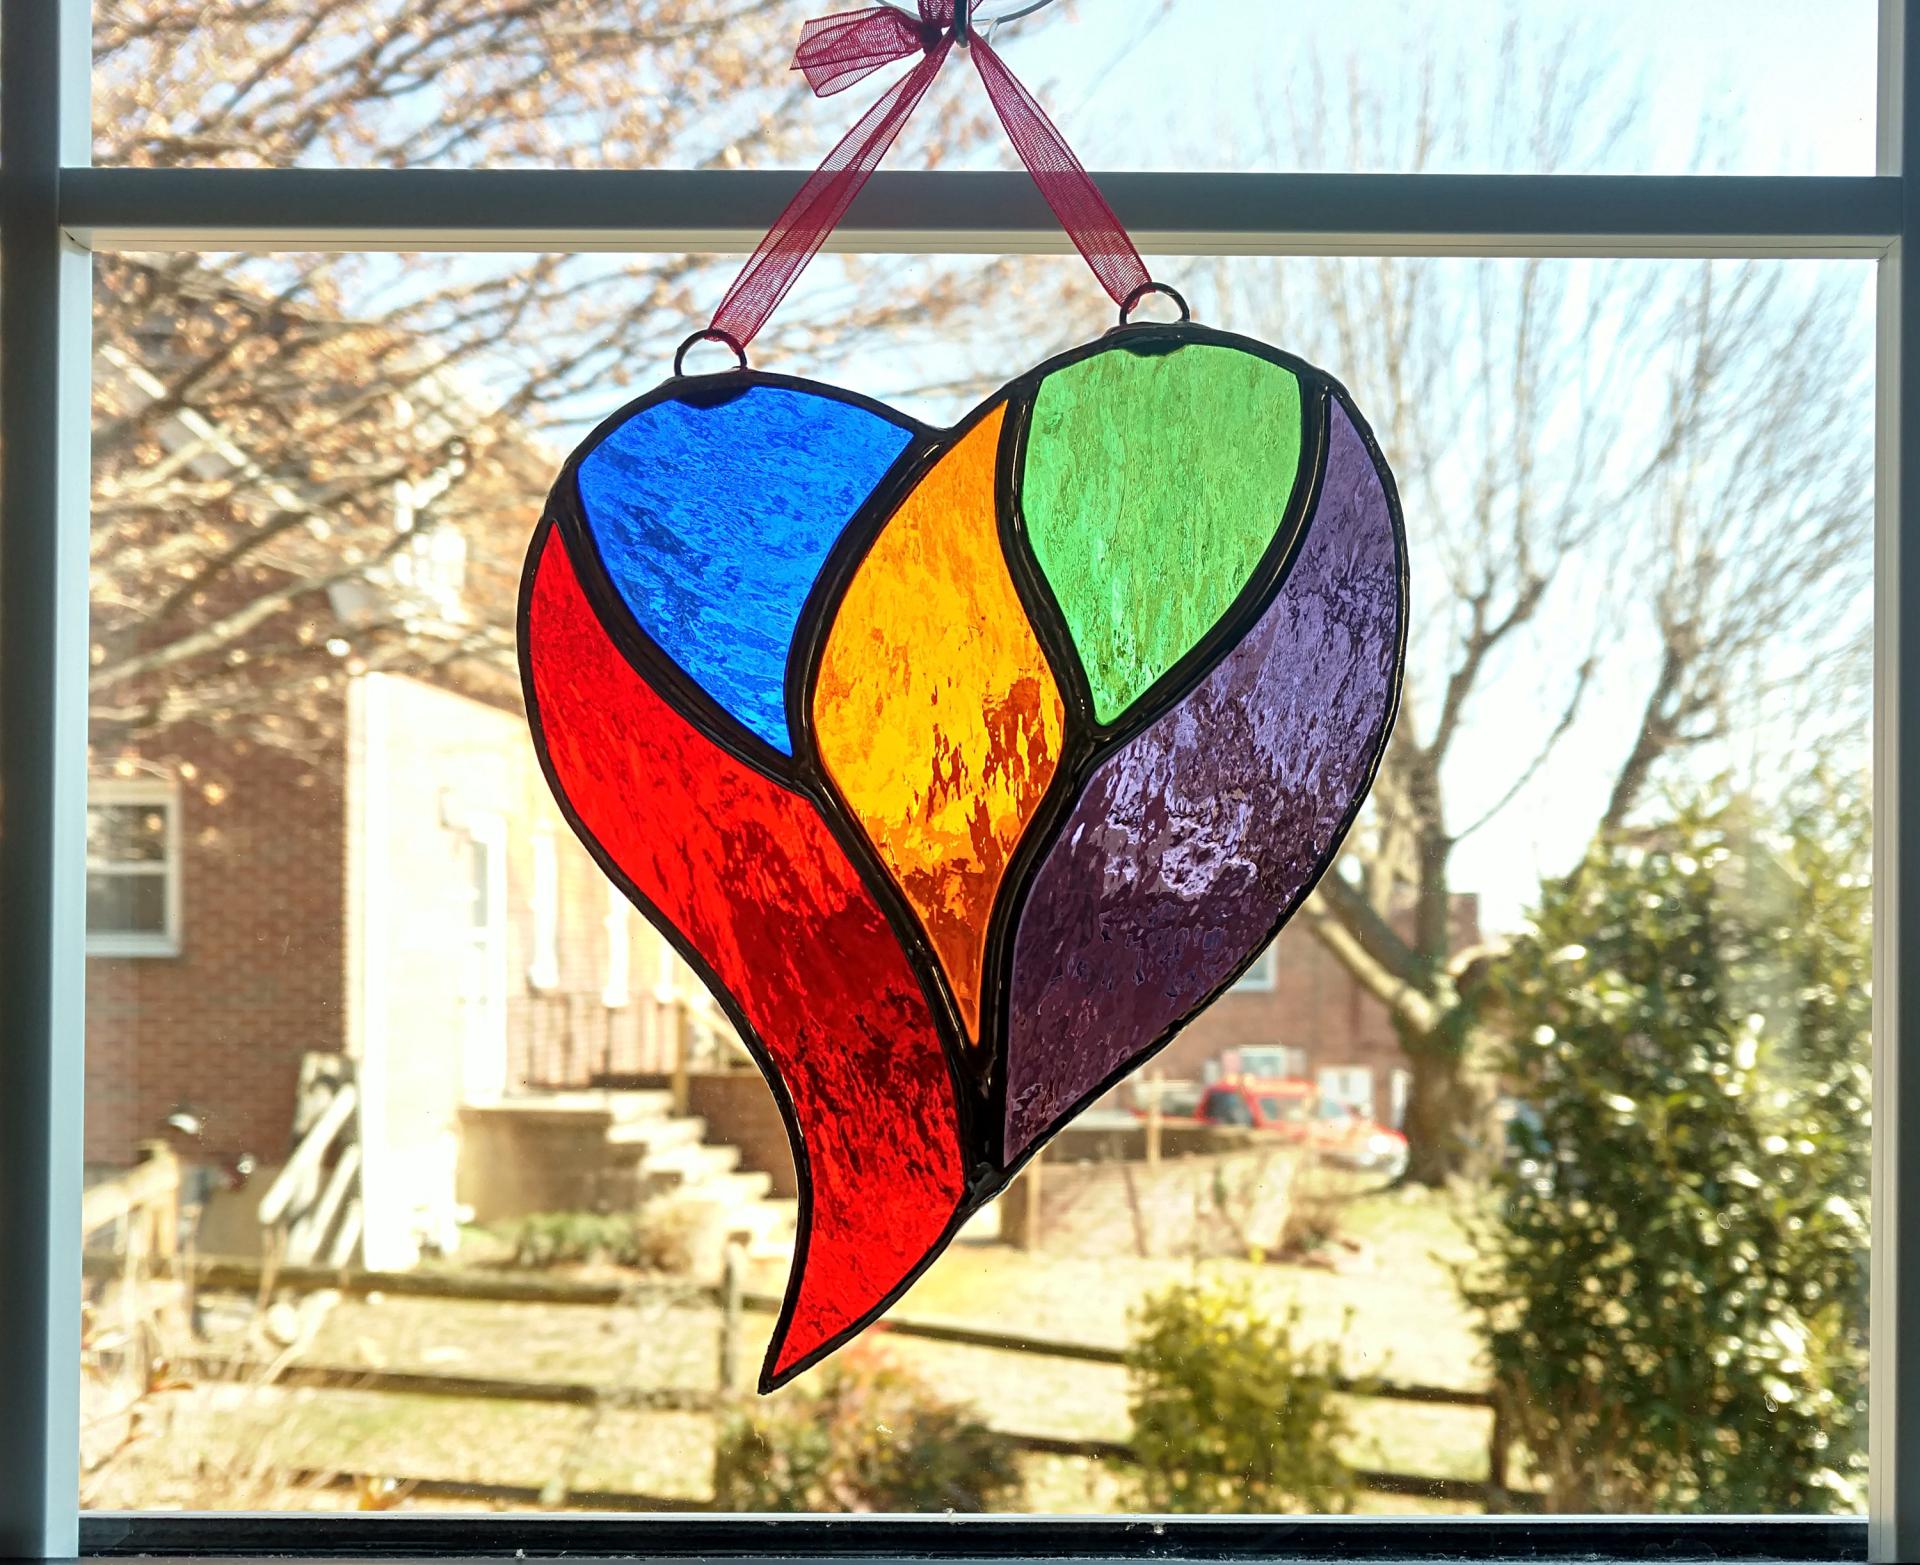 rainbow stained glass heart suncatcher measuring five inches by six inches.  Made with blue, green, amber, purple, and red cathedral glass and comes with a suction cup hanger and red ribbon.